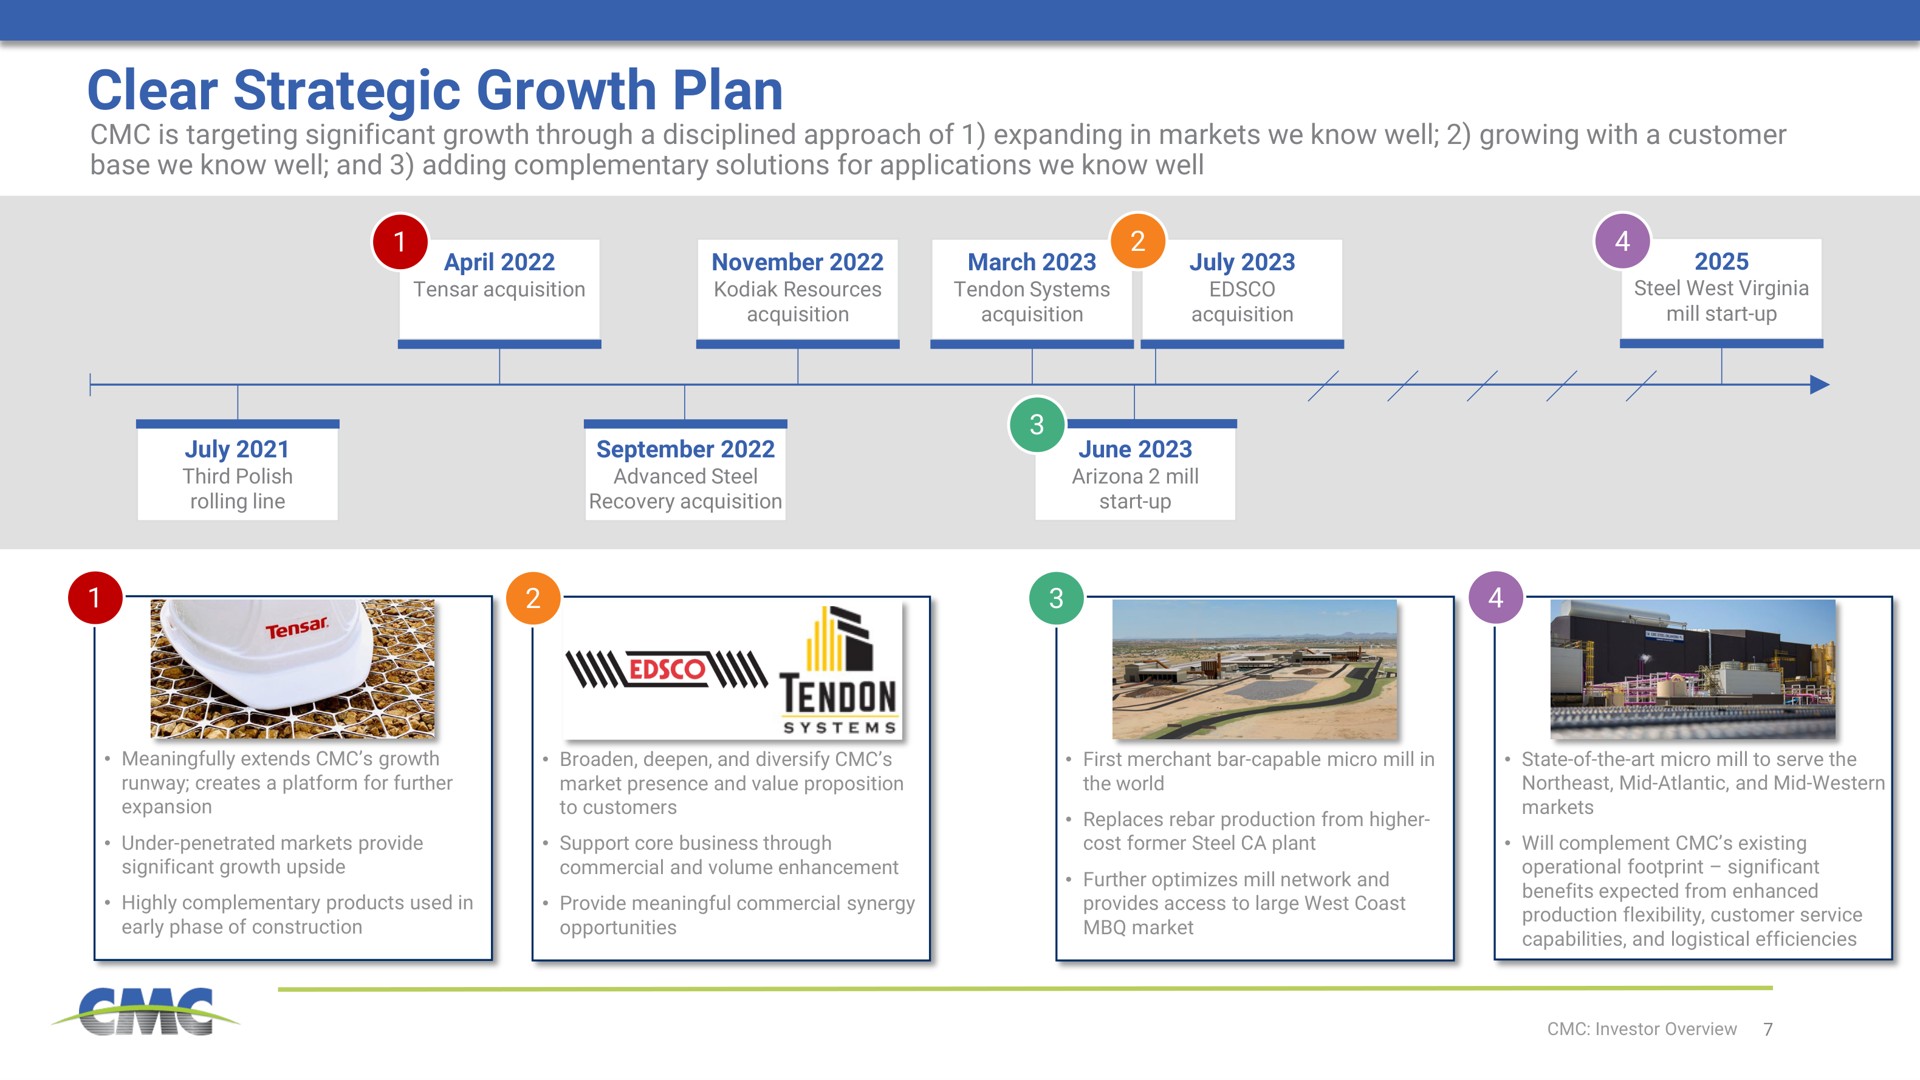 clear strategic growth plan tendon | Commercial Metals Company